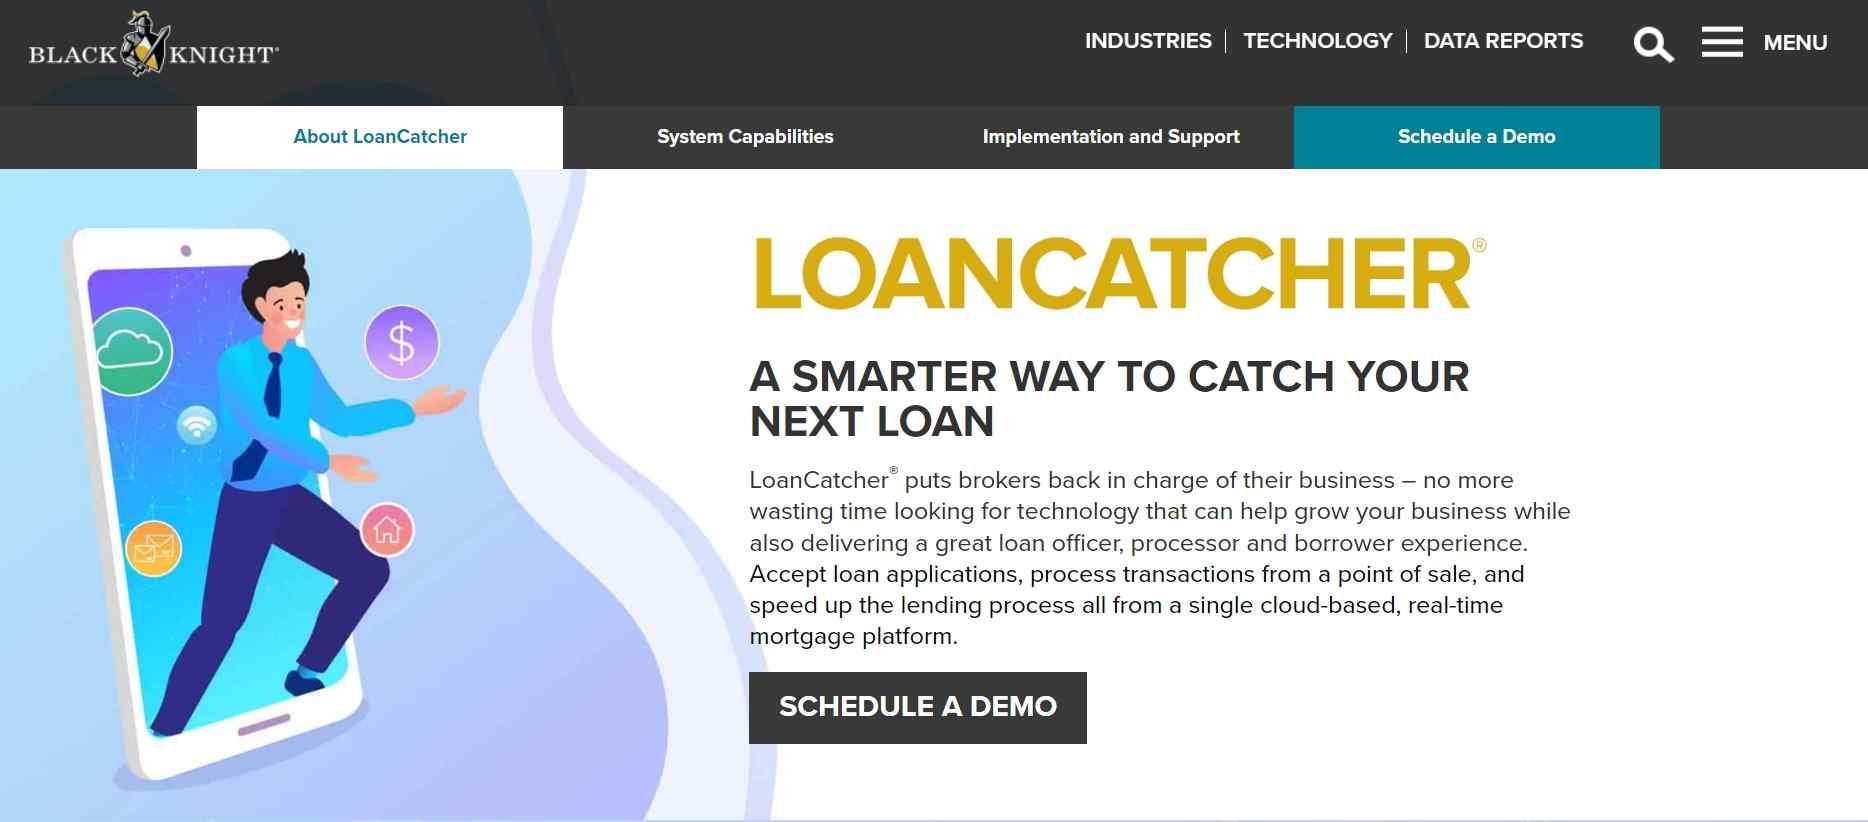 LoanCatcher makes it easy and safe for borrowers to search for, compare, and apply for loans quickly and easily.